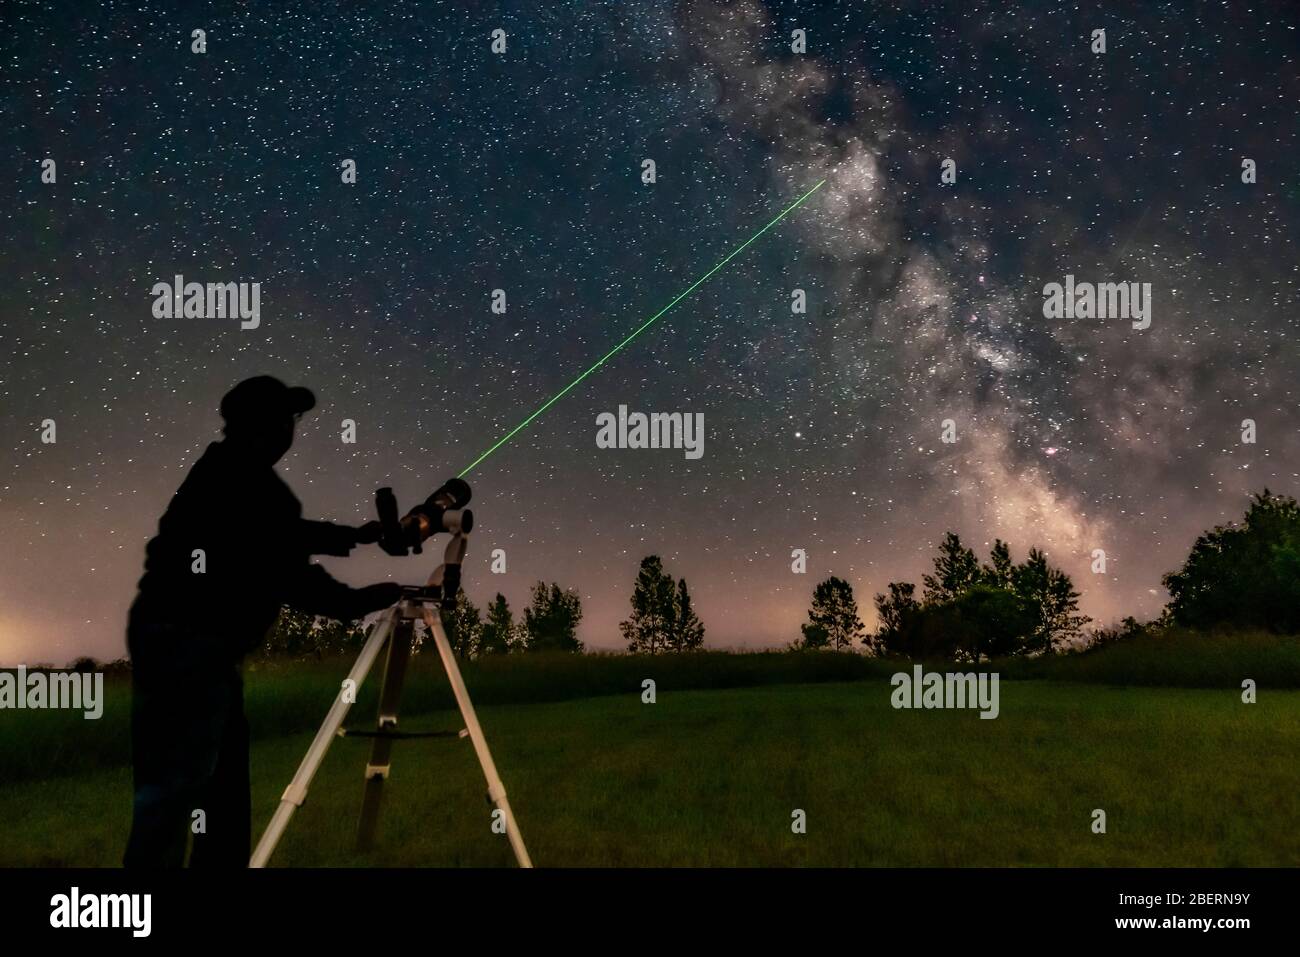 Astrophotographer aiming an 80mm refractor at the Milky Way. Stock Photo